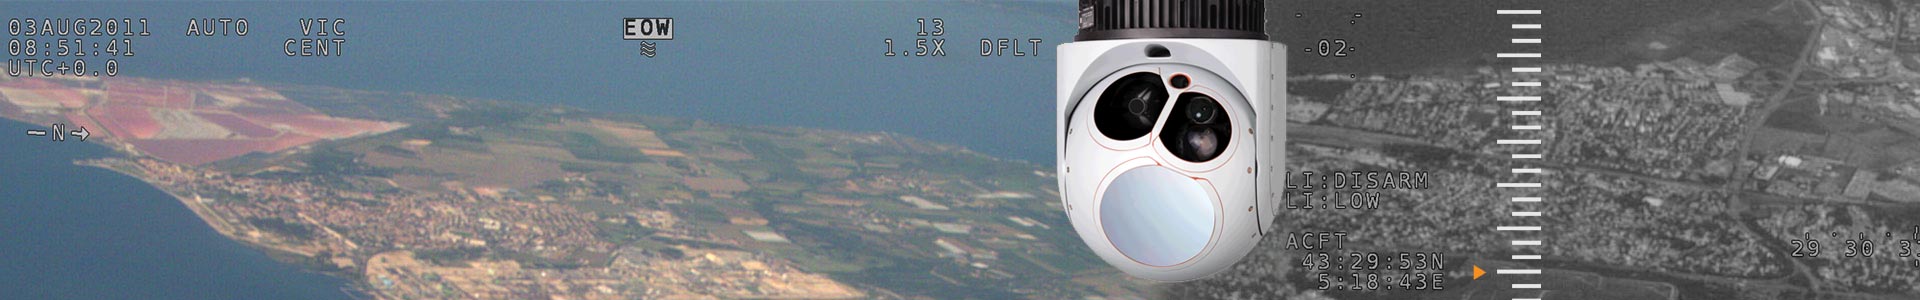 distributor of L3-Wescam cameras for France and Luxembourg